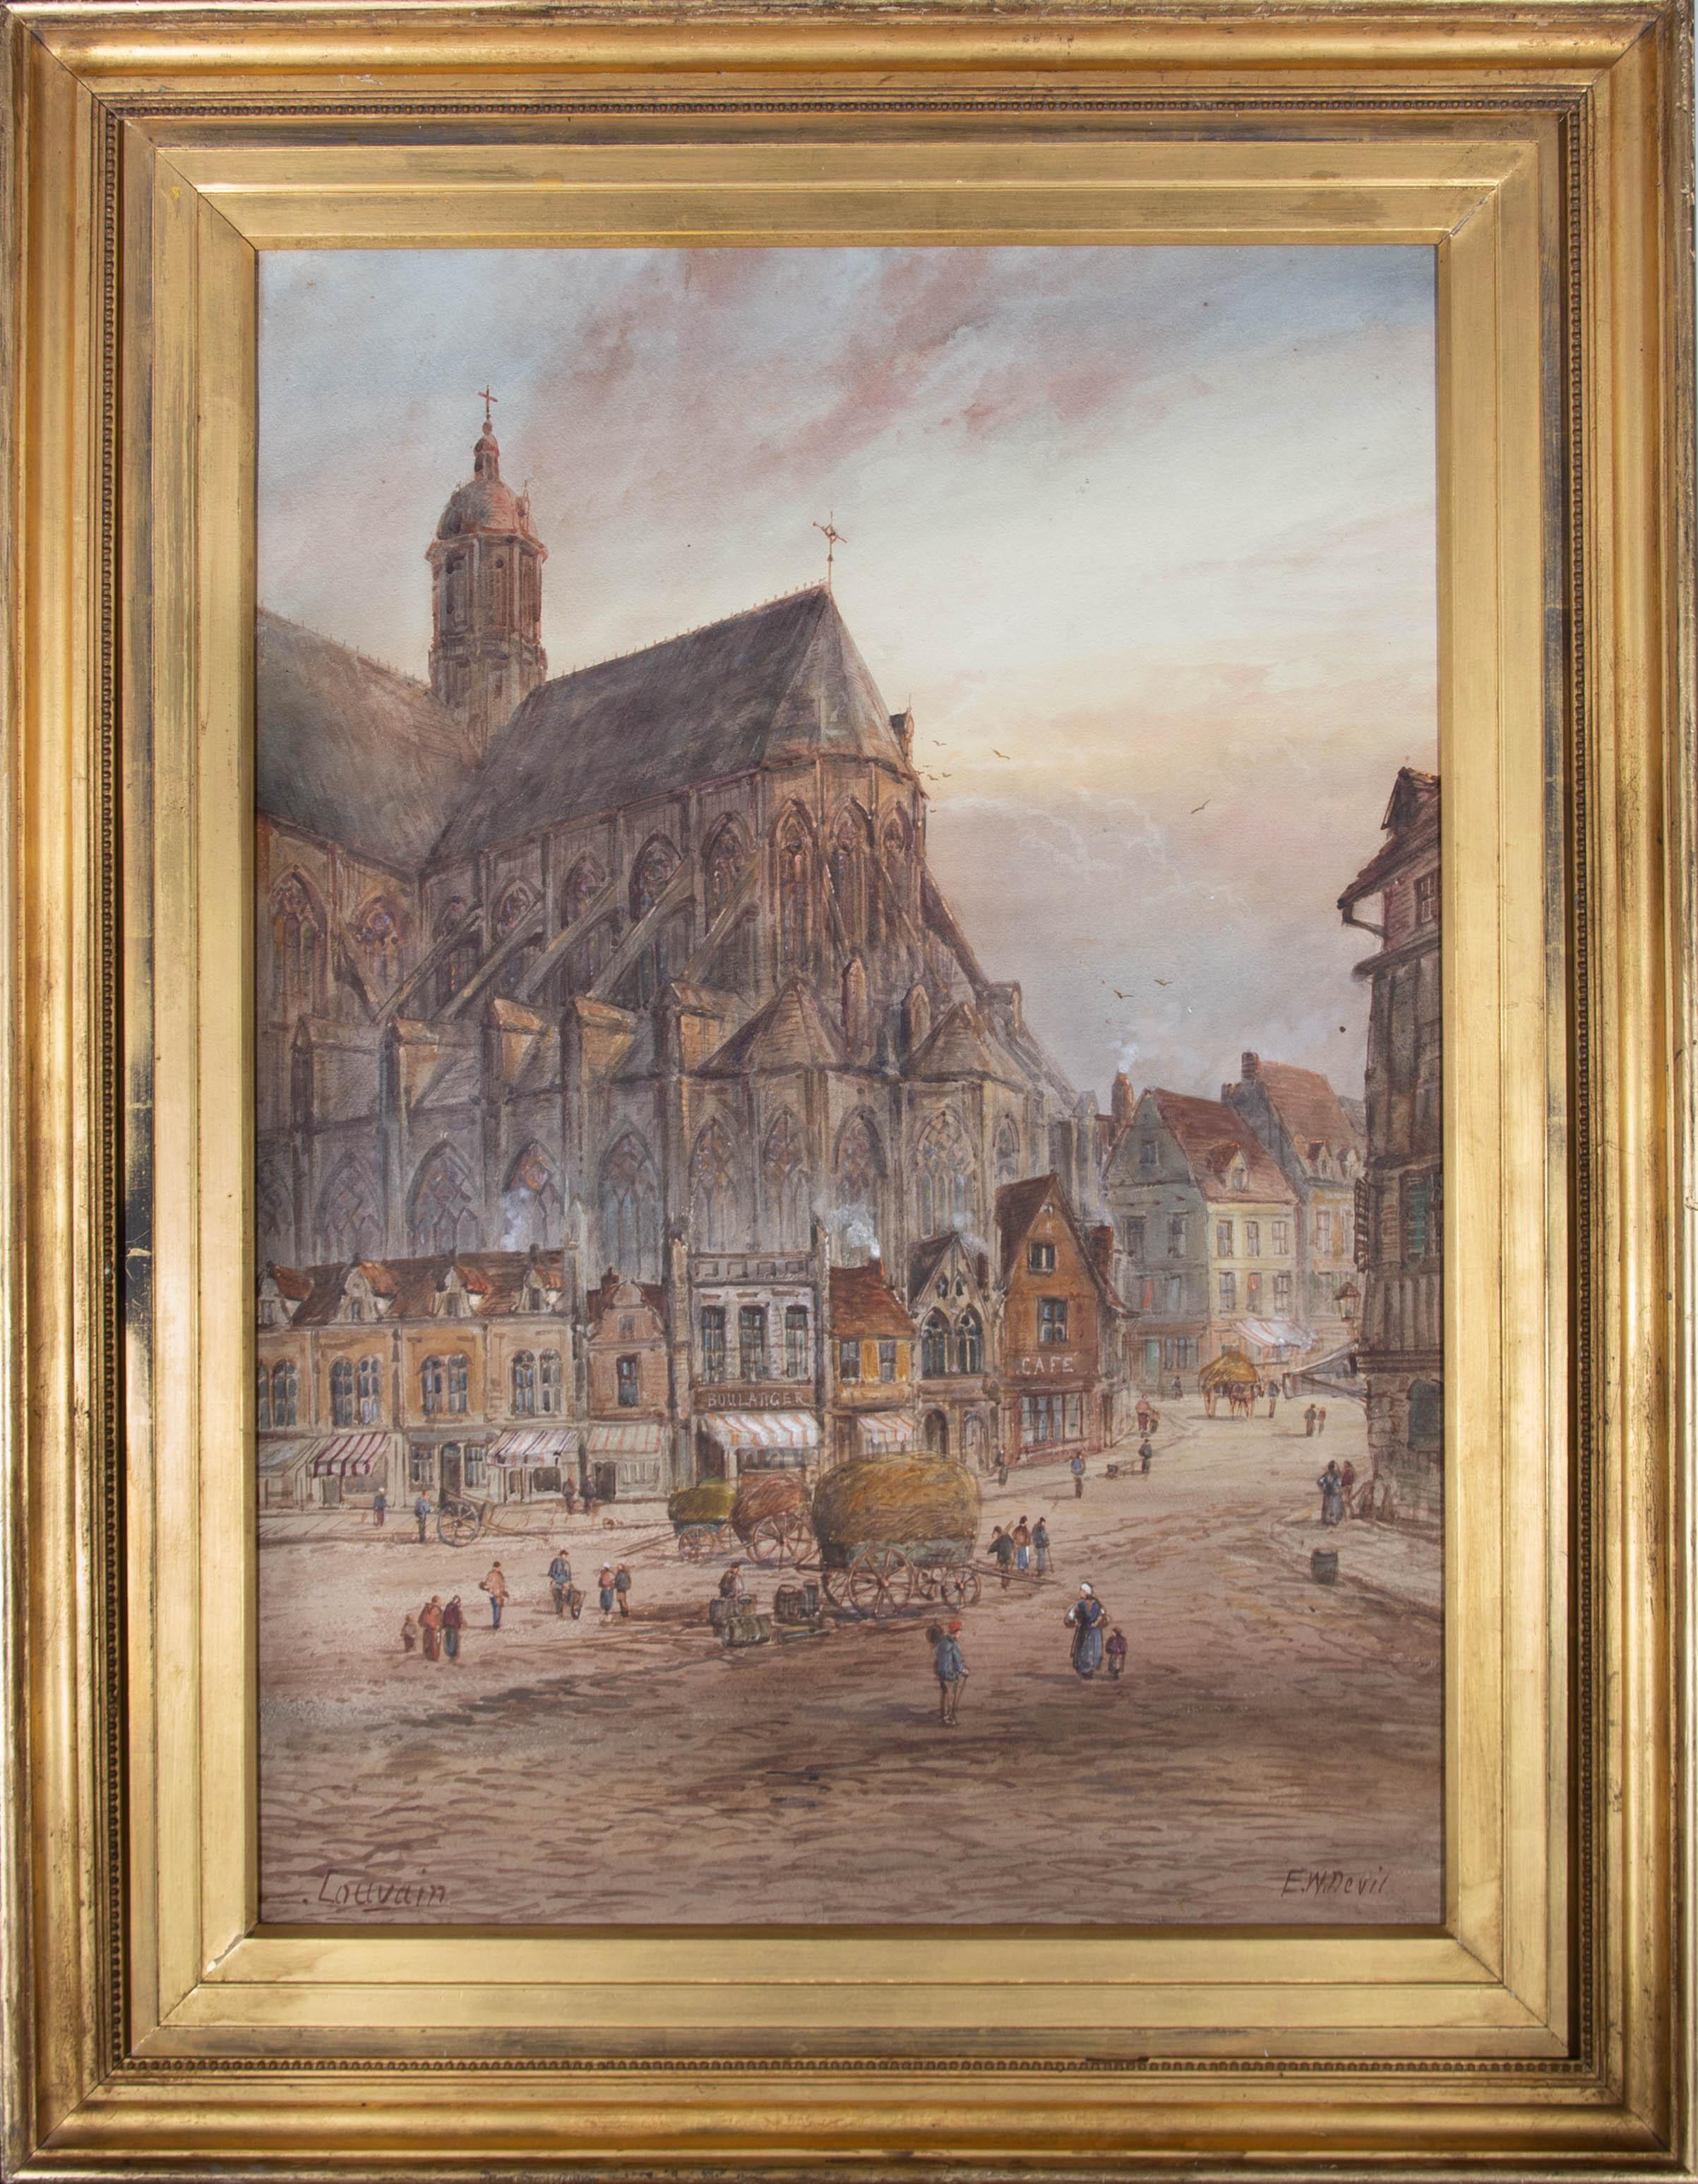 A bustling street scene outside St Peter's Church in Leuven, Belgium, a Roman Catholic church built in the 15th century in the Brabantine Gothic style. Presented in a substantial distressed gilt frame and slip. Signed to the lower-right edge and